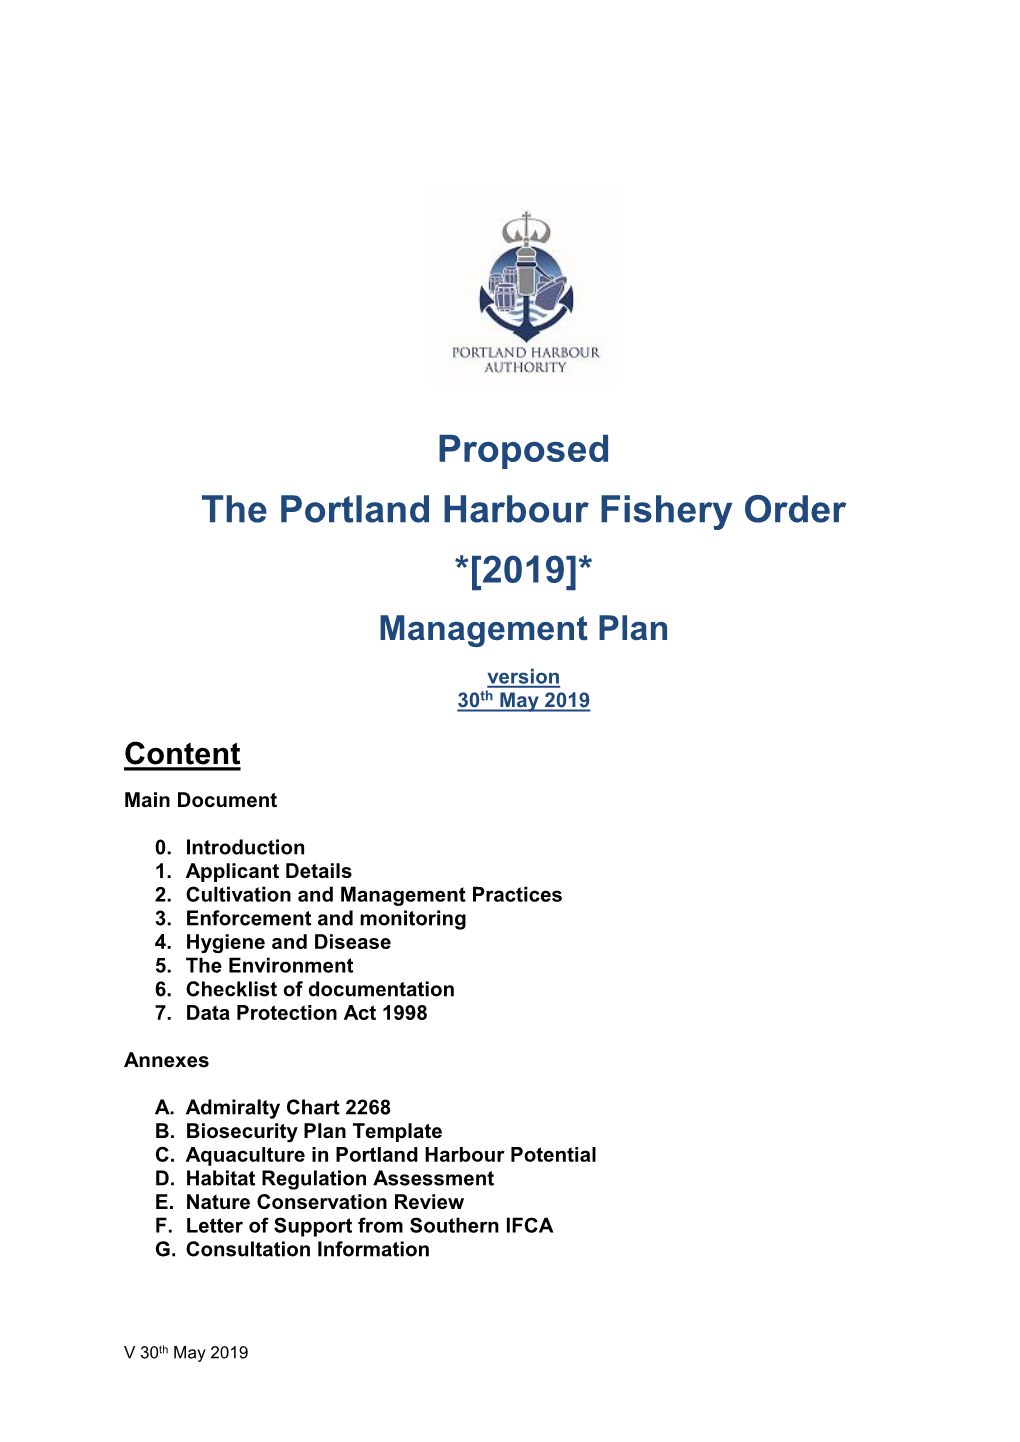 Proposed the Portland Harbour Fishery Order *[2019]* Management Plan Version 30Th May 2019